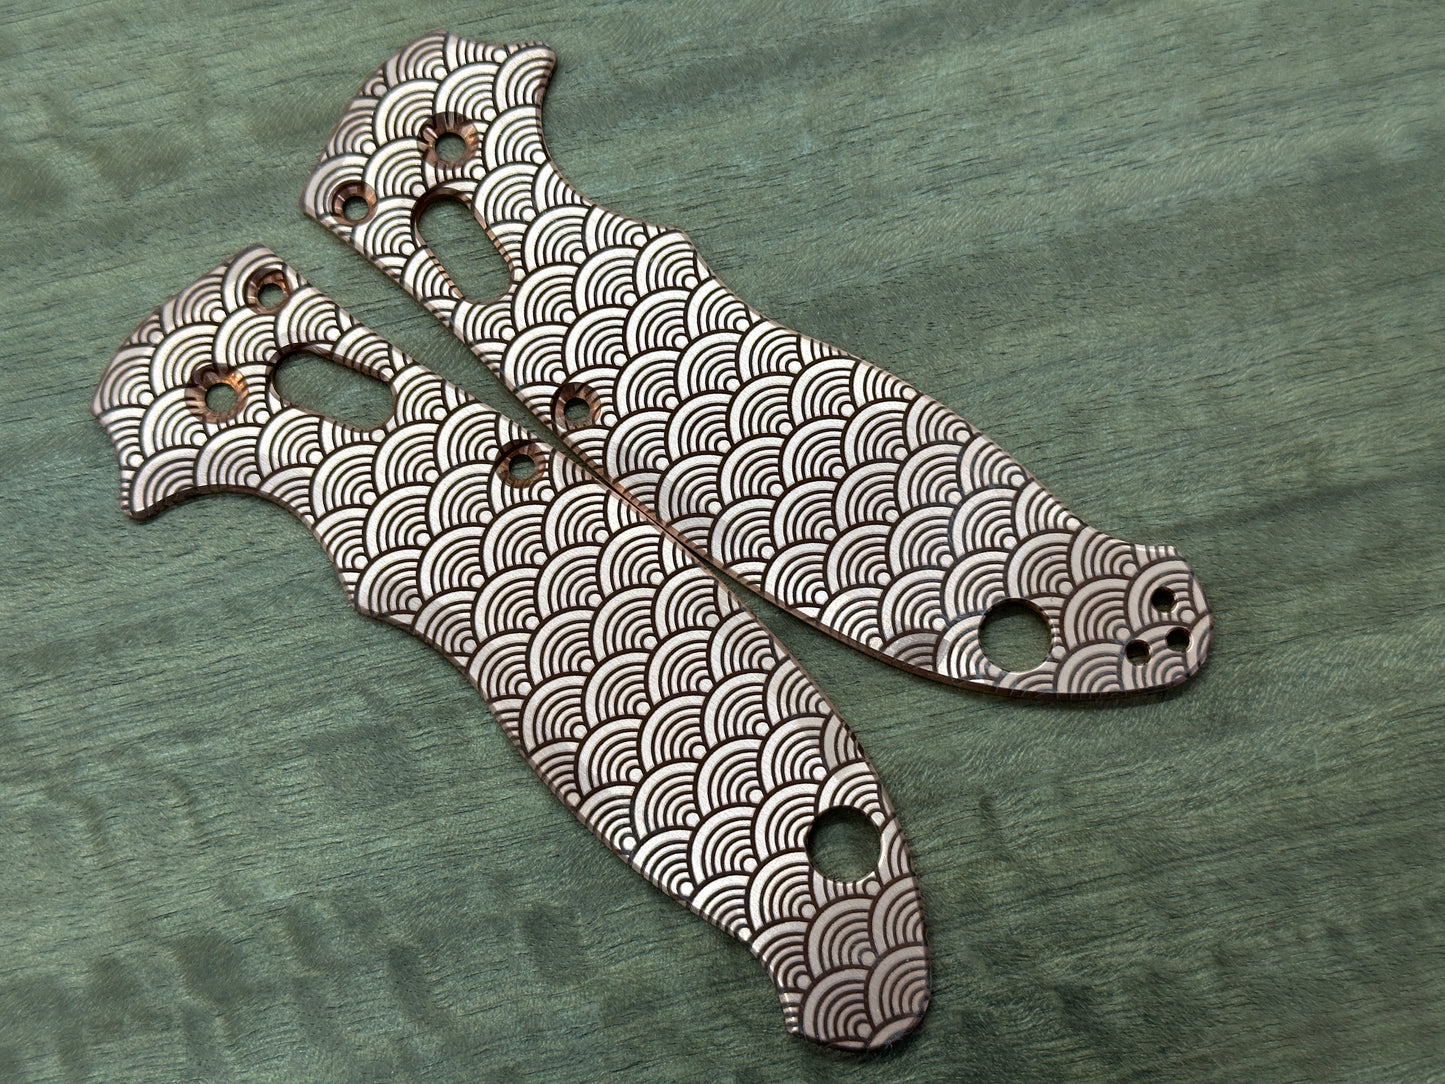 SEIGAIHA Copper scales for Spyderco MANIX 2